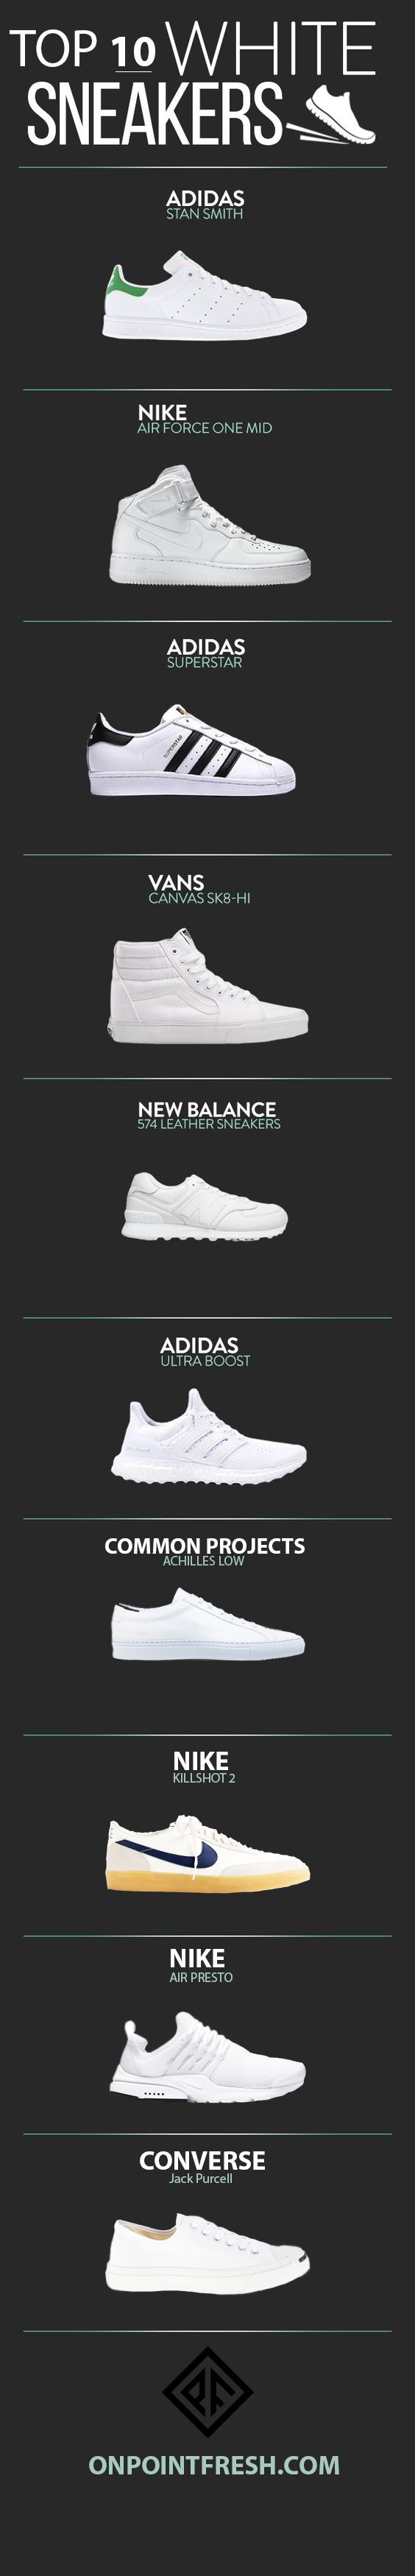 top-10-white-sneakers-infographic